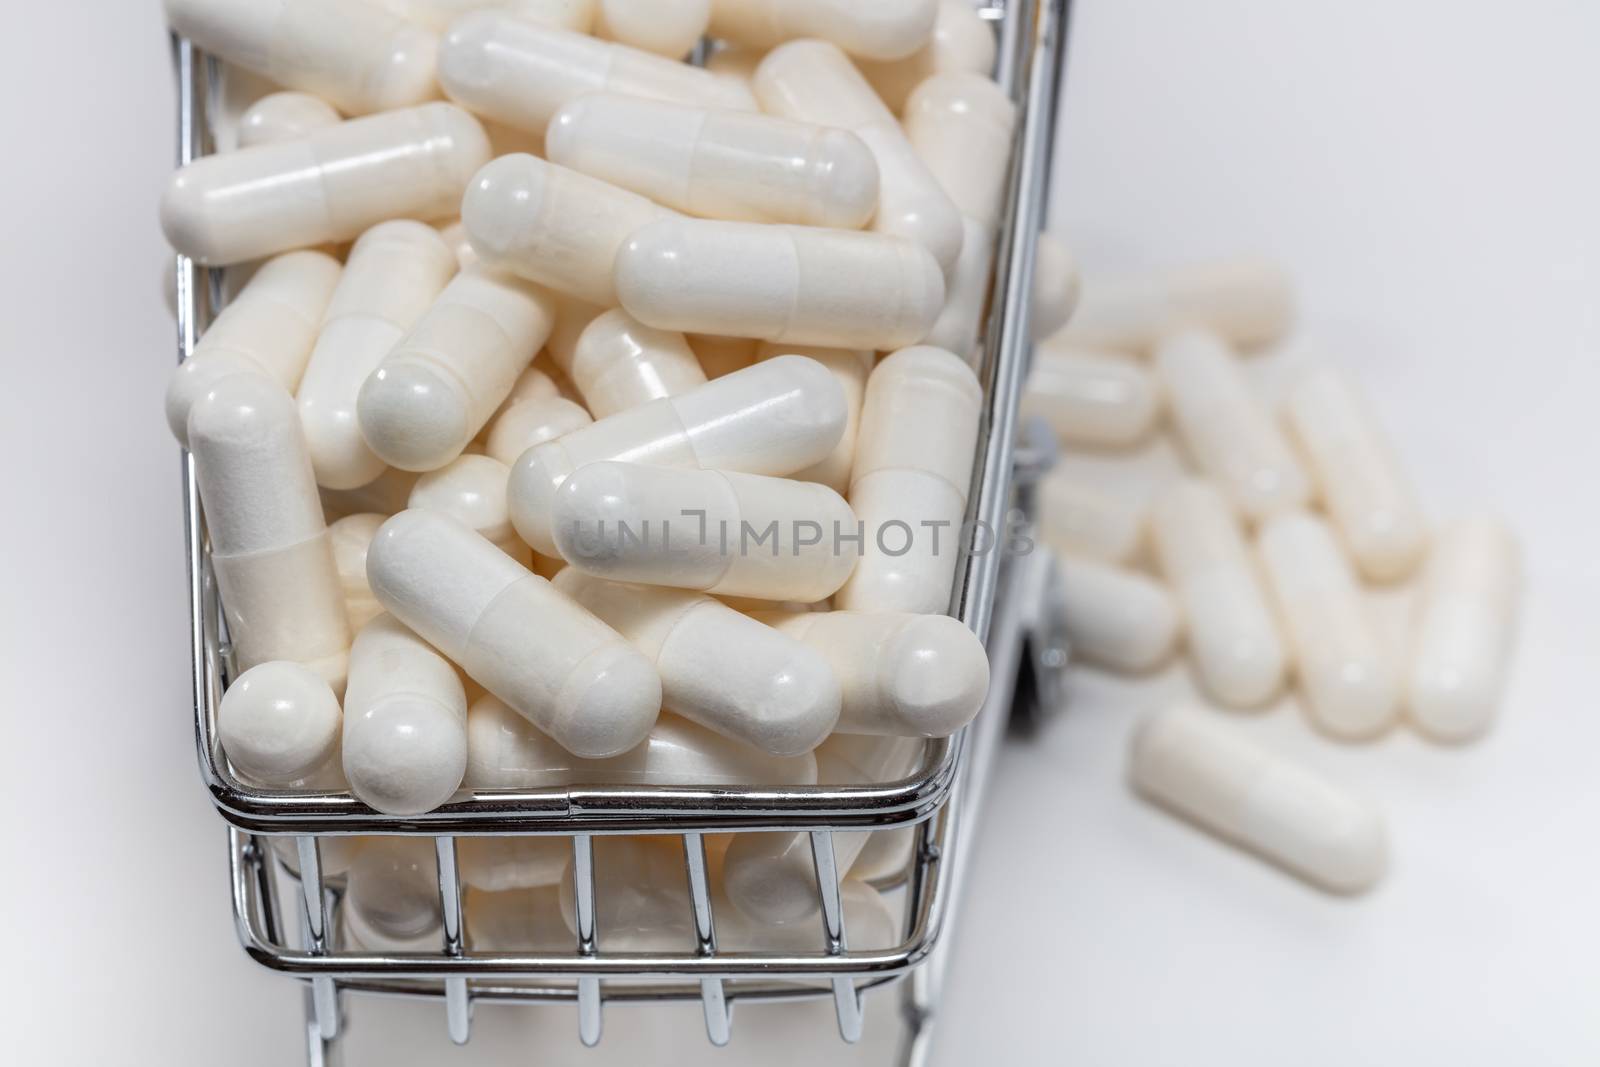 High angle shot of a small shopping cart full of white pills. White background. Close up shot. Some pills under the cart blurry in the background. Shopping online, pharmaceutical business concepts.